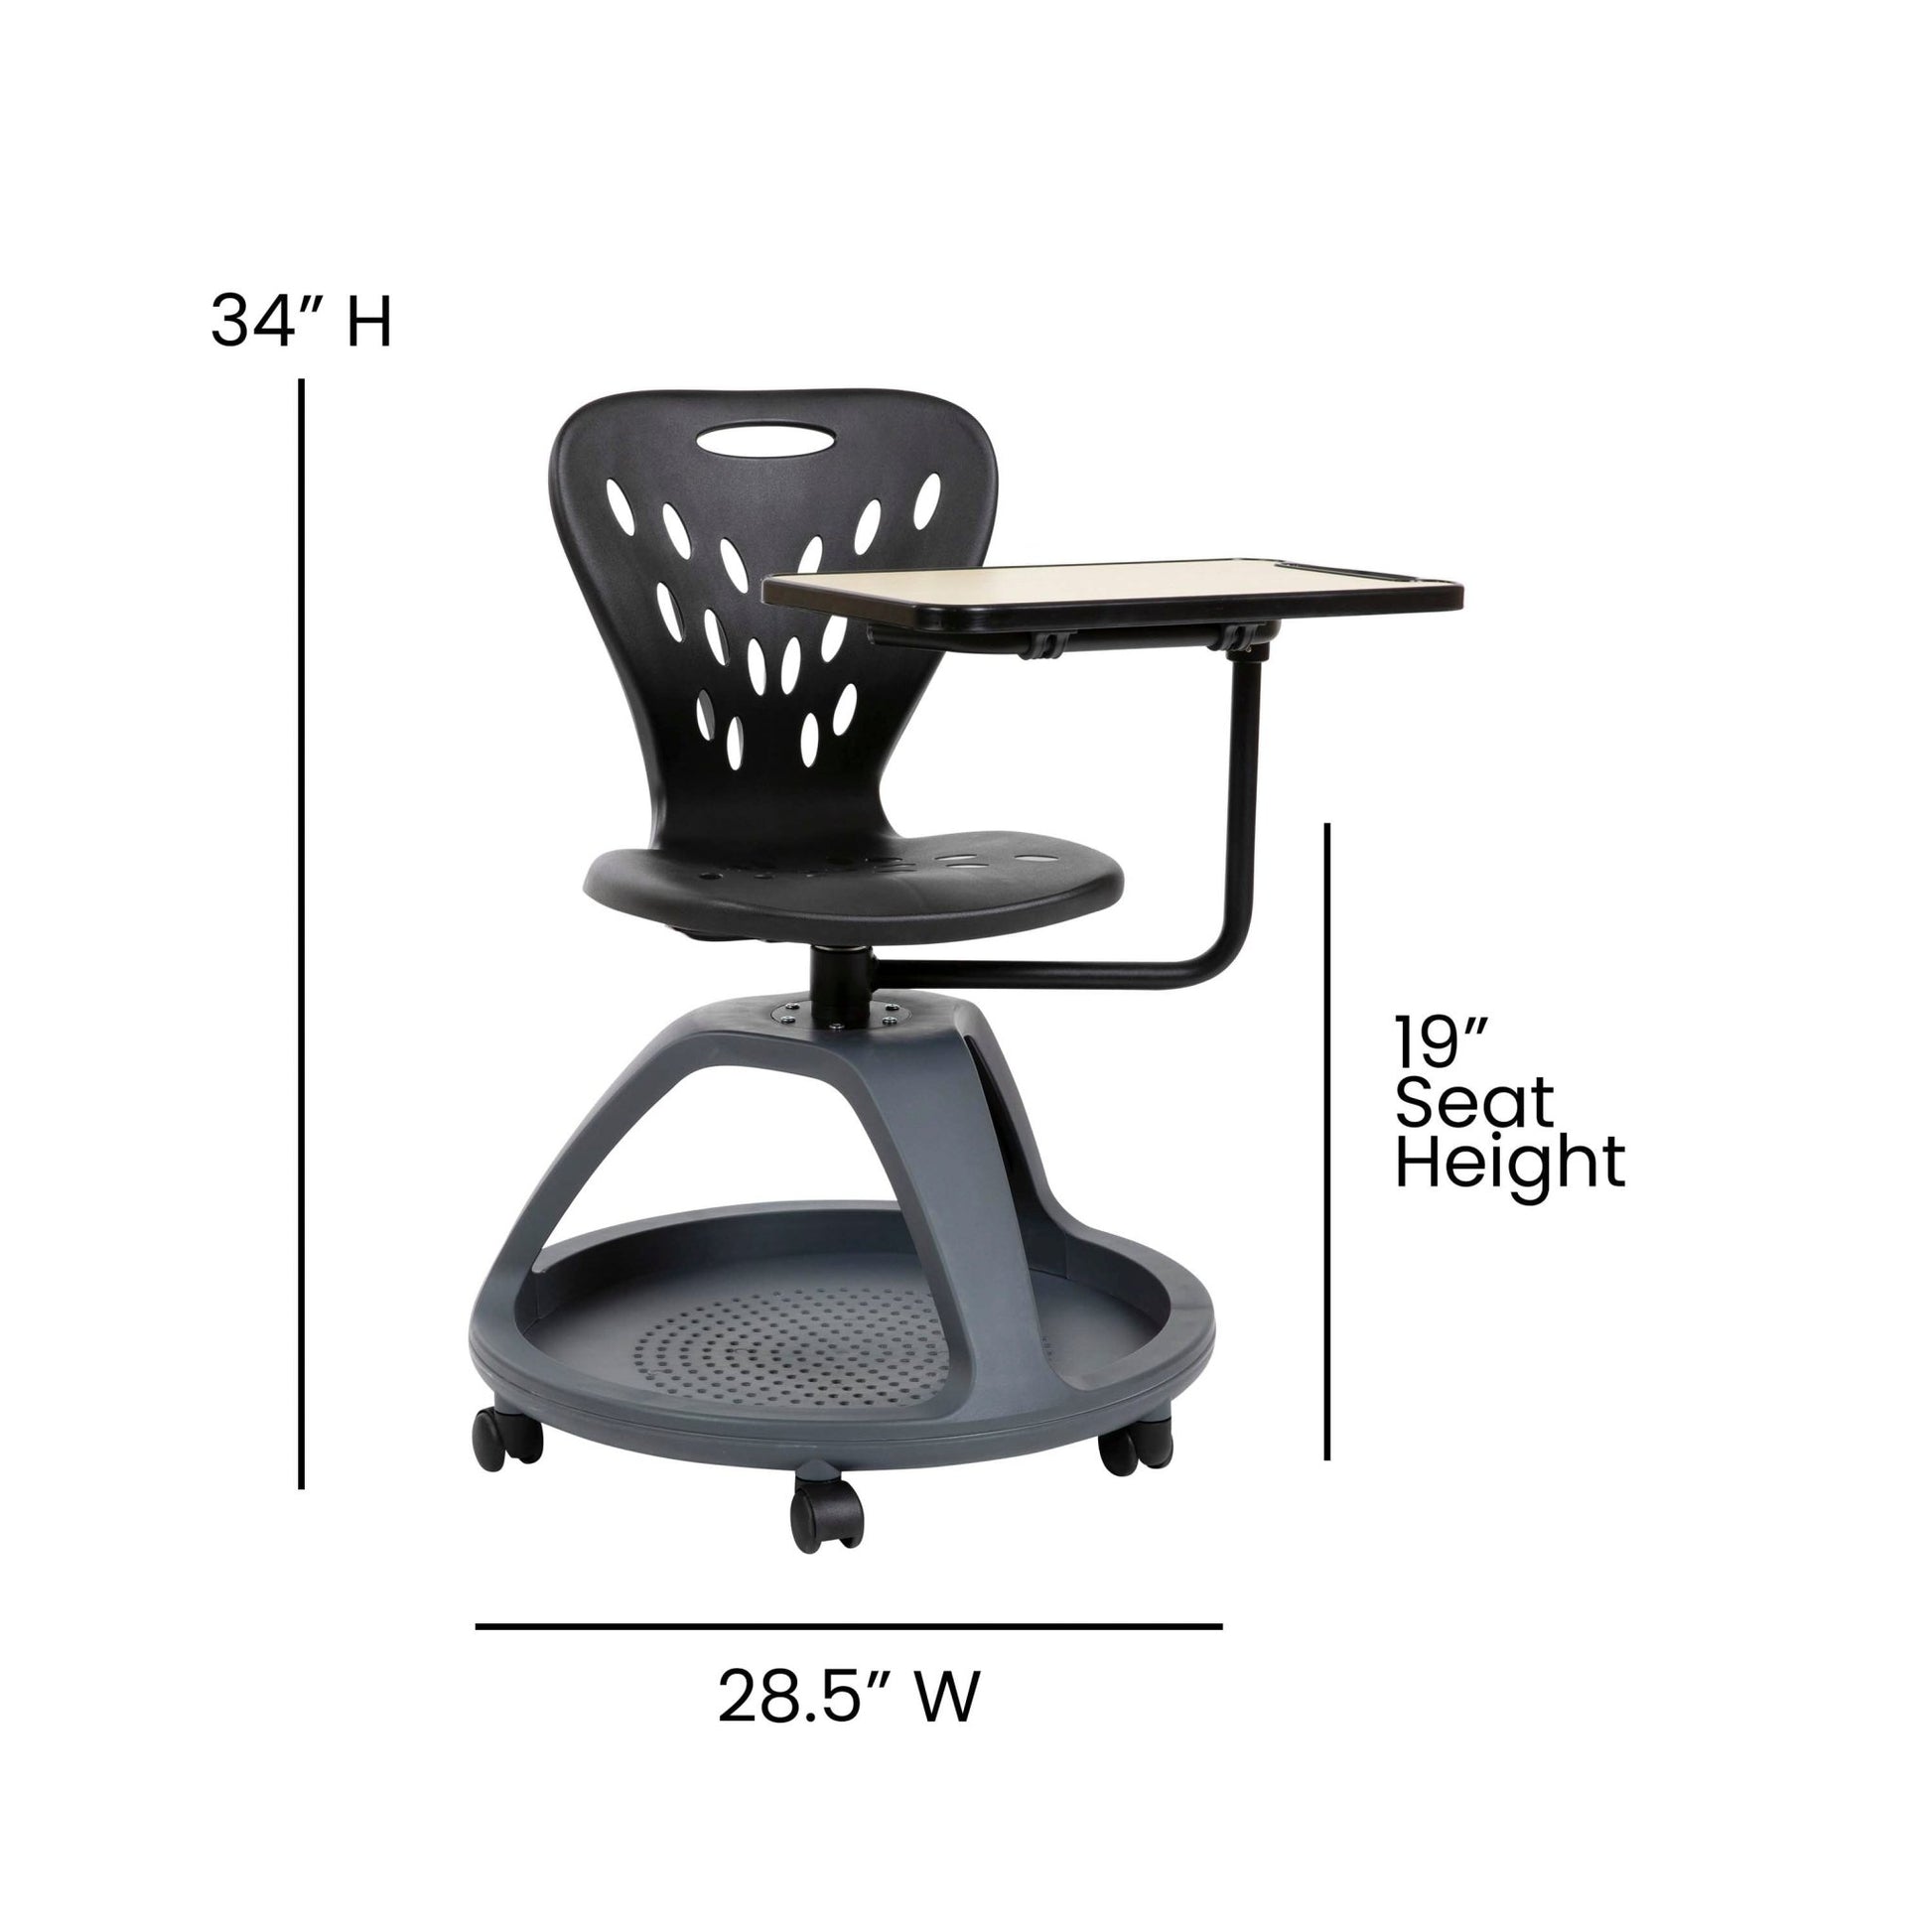 Laikyn Black Mobile Desk Chair with 360 Degree Tablet Rotation and Under Seat Storage Cubby - SchoolOutlet